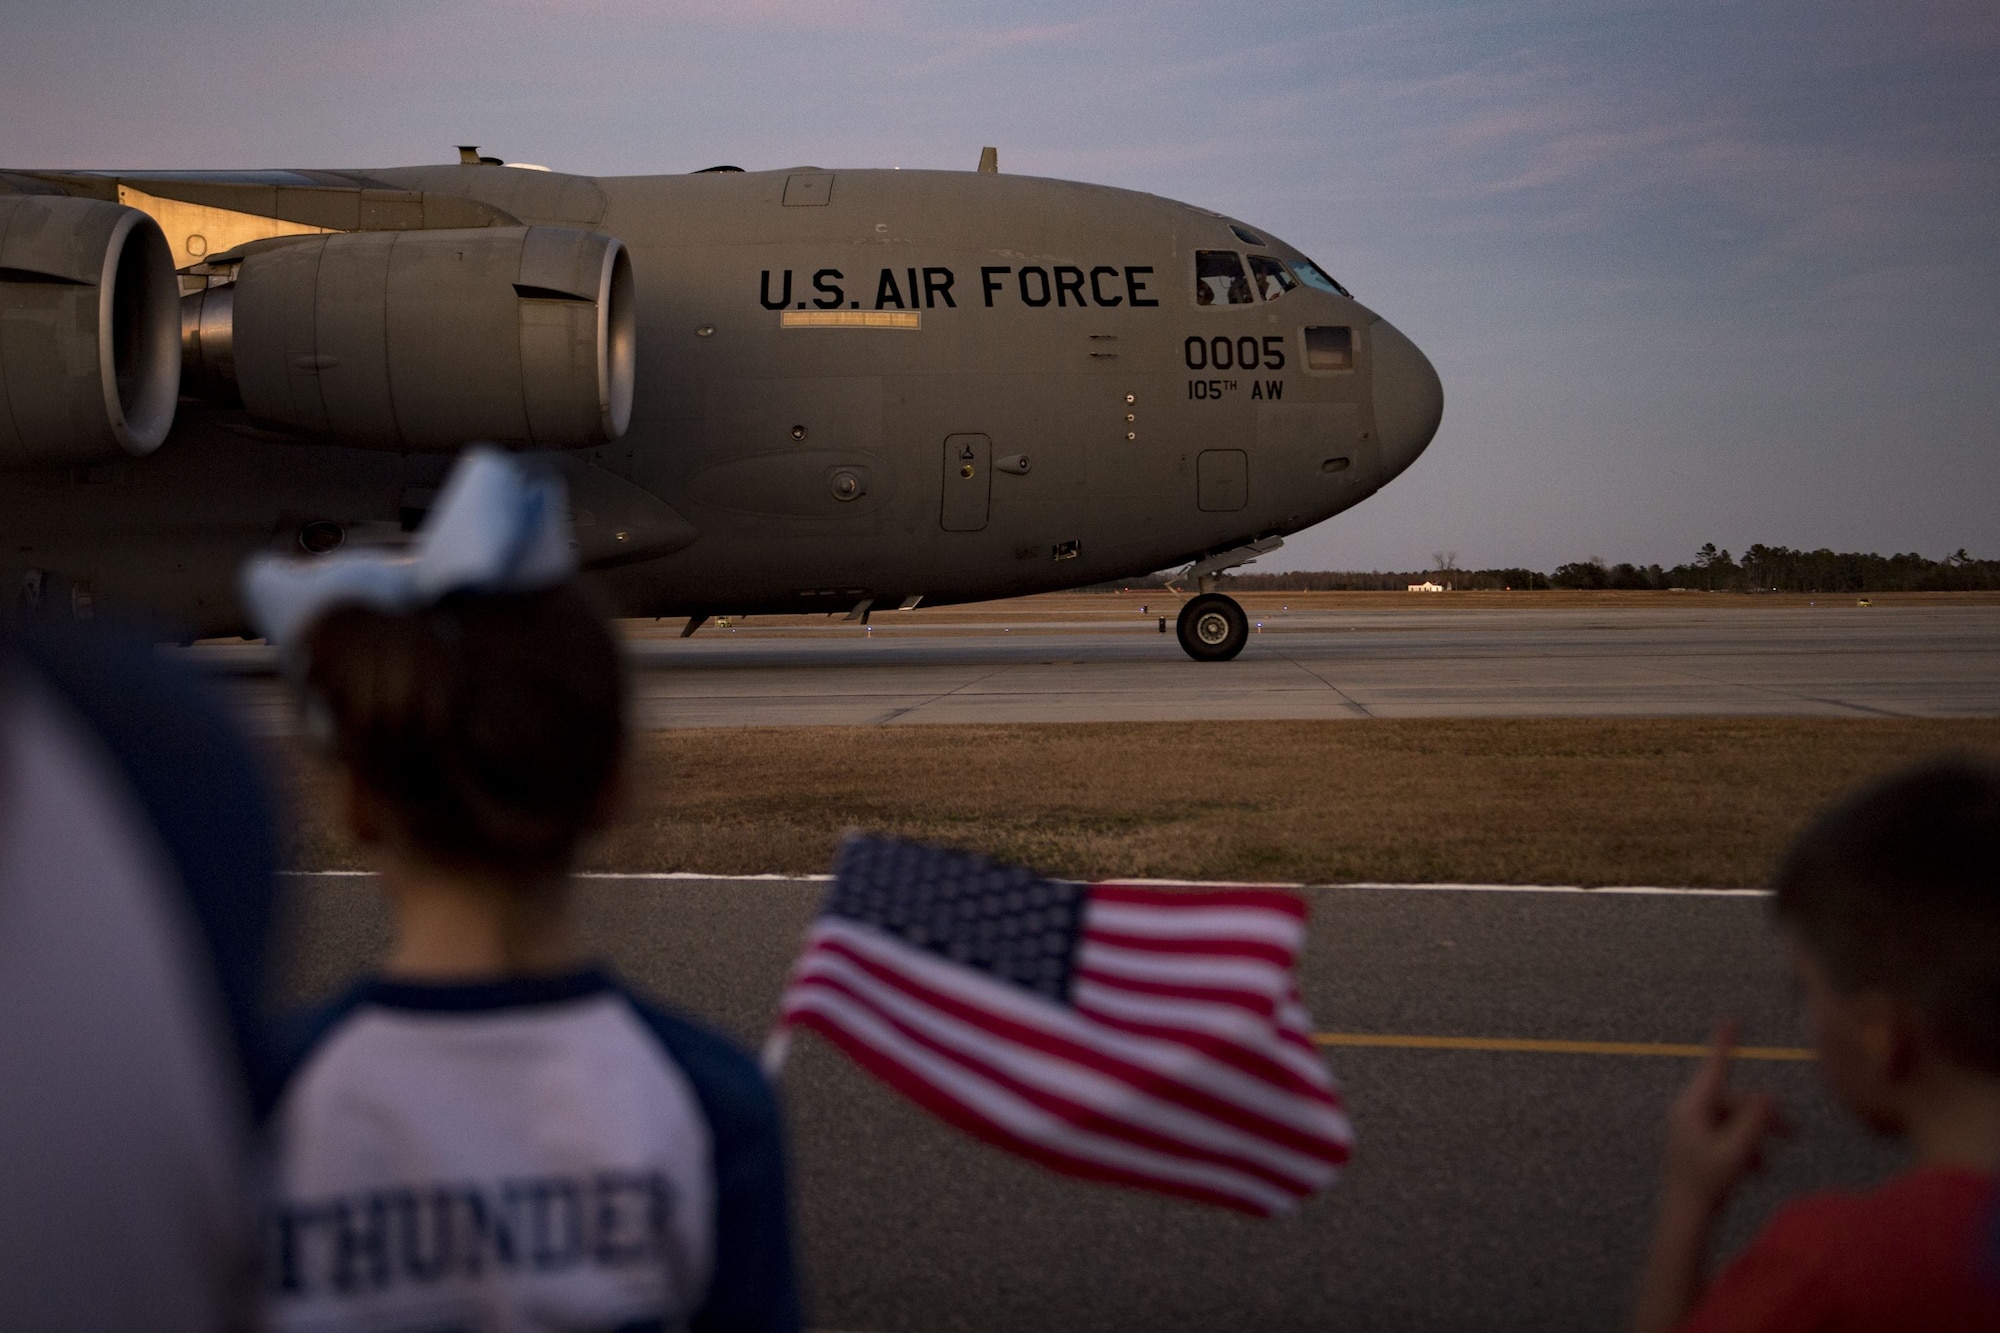 Families and friends wait for their loved ones to exit a C-17 Globemaster III during a redeployment, Jan. 23, 2018, at Moody Air Force Base, Ga. Airmen from the 74th Fighter Squadron and 23d Maintenance Group returned home after a seven-month deployment in support of Operation Inherent Resolve. (U.S. Air Force photo by Senior Airman Daniel Snider)